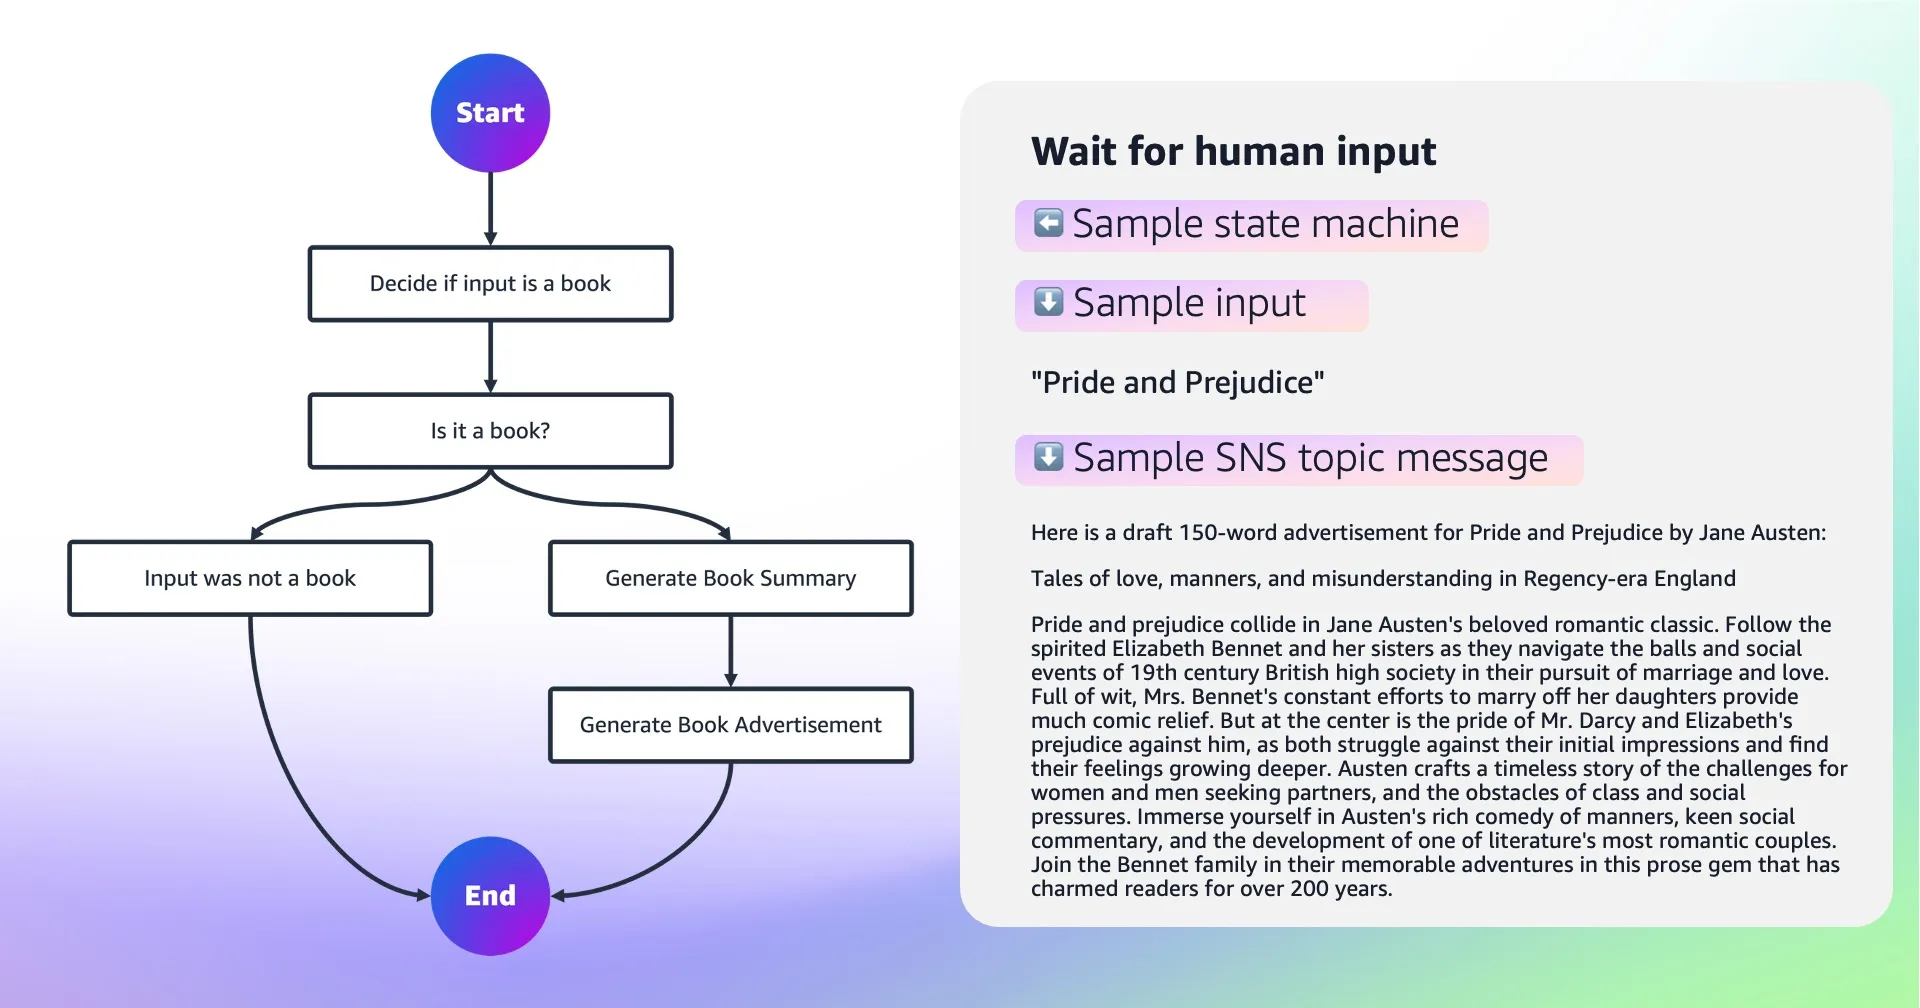 Workflow pauses for human input after generating book advertisement draft, sent via SNS for approval